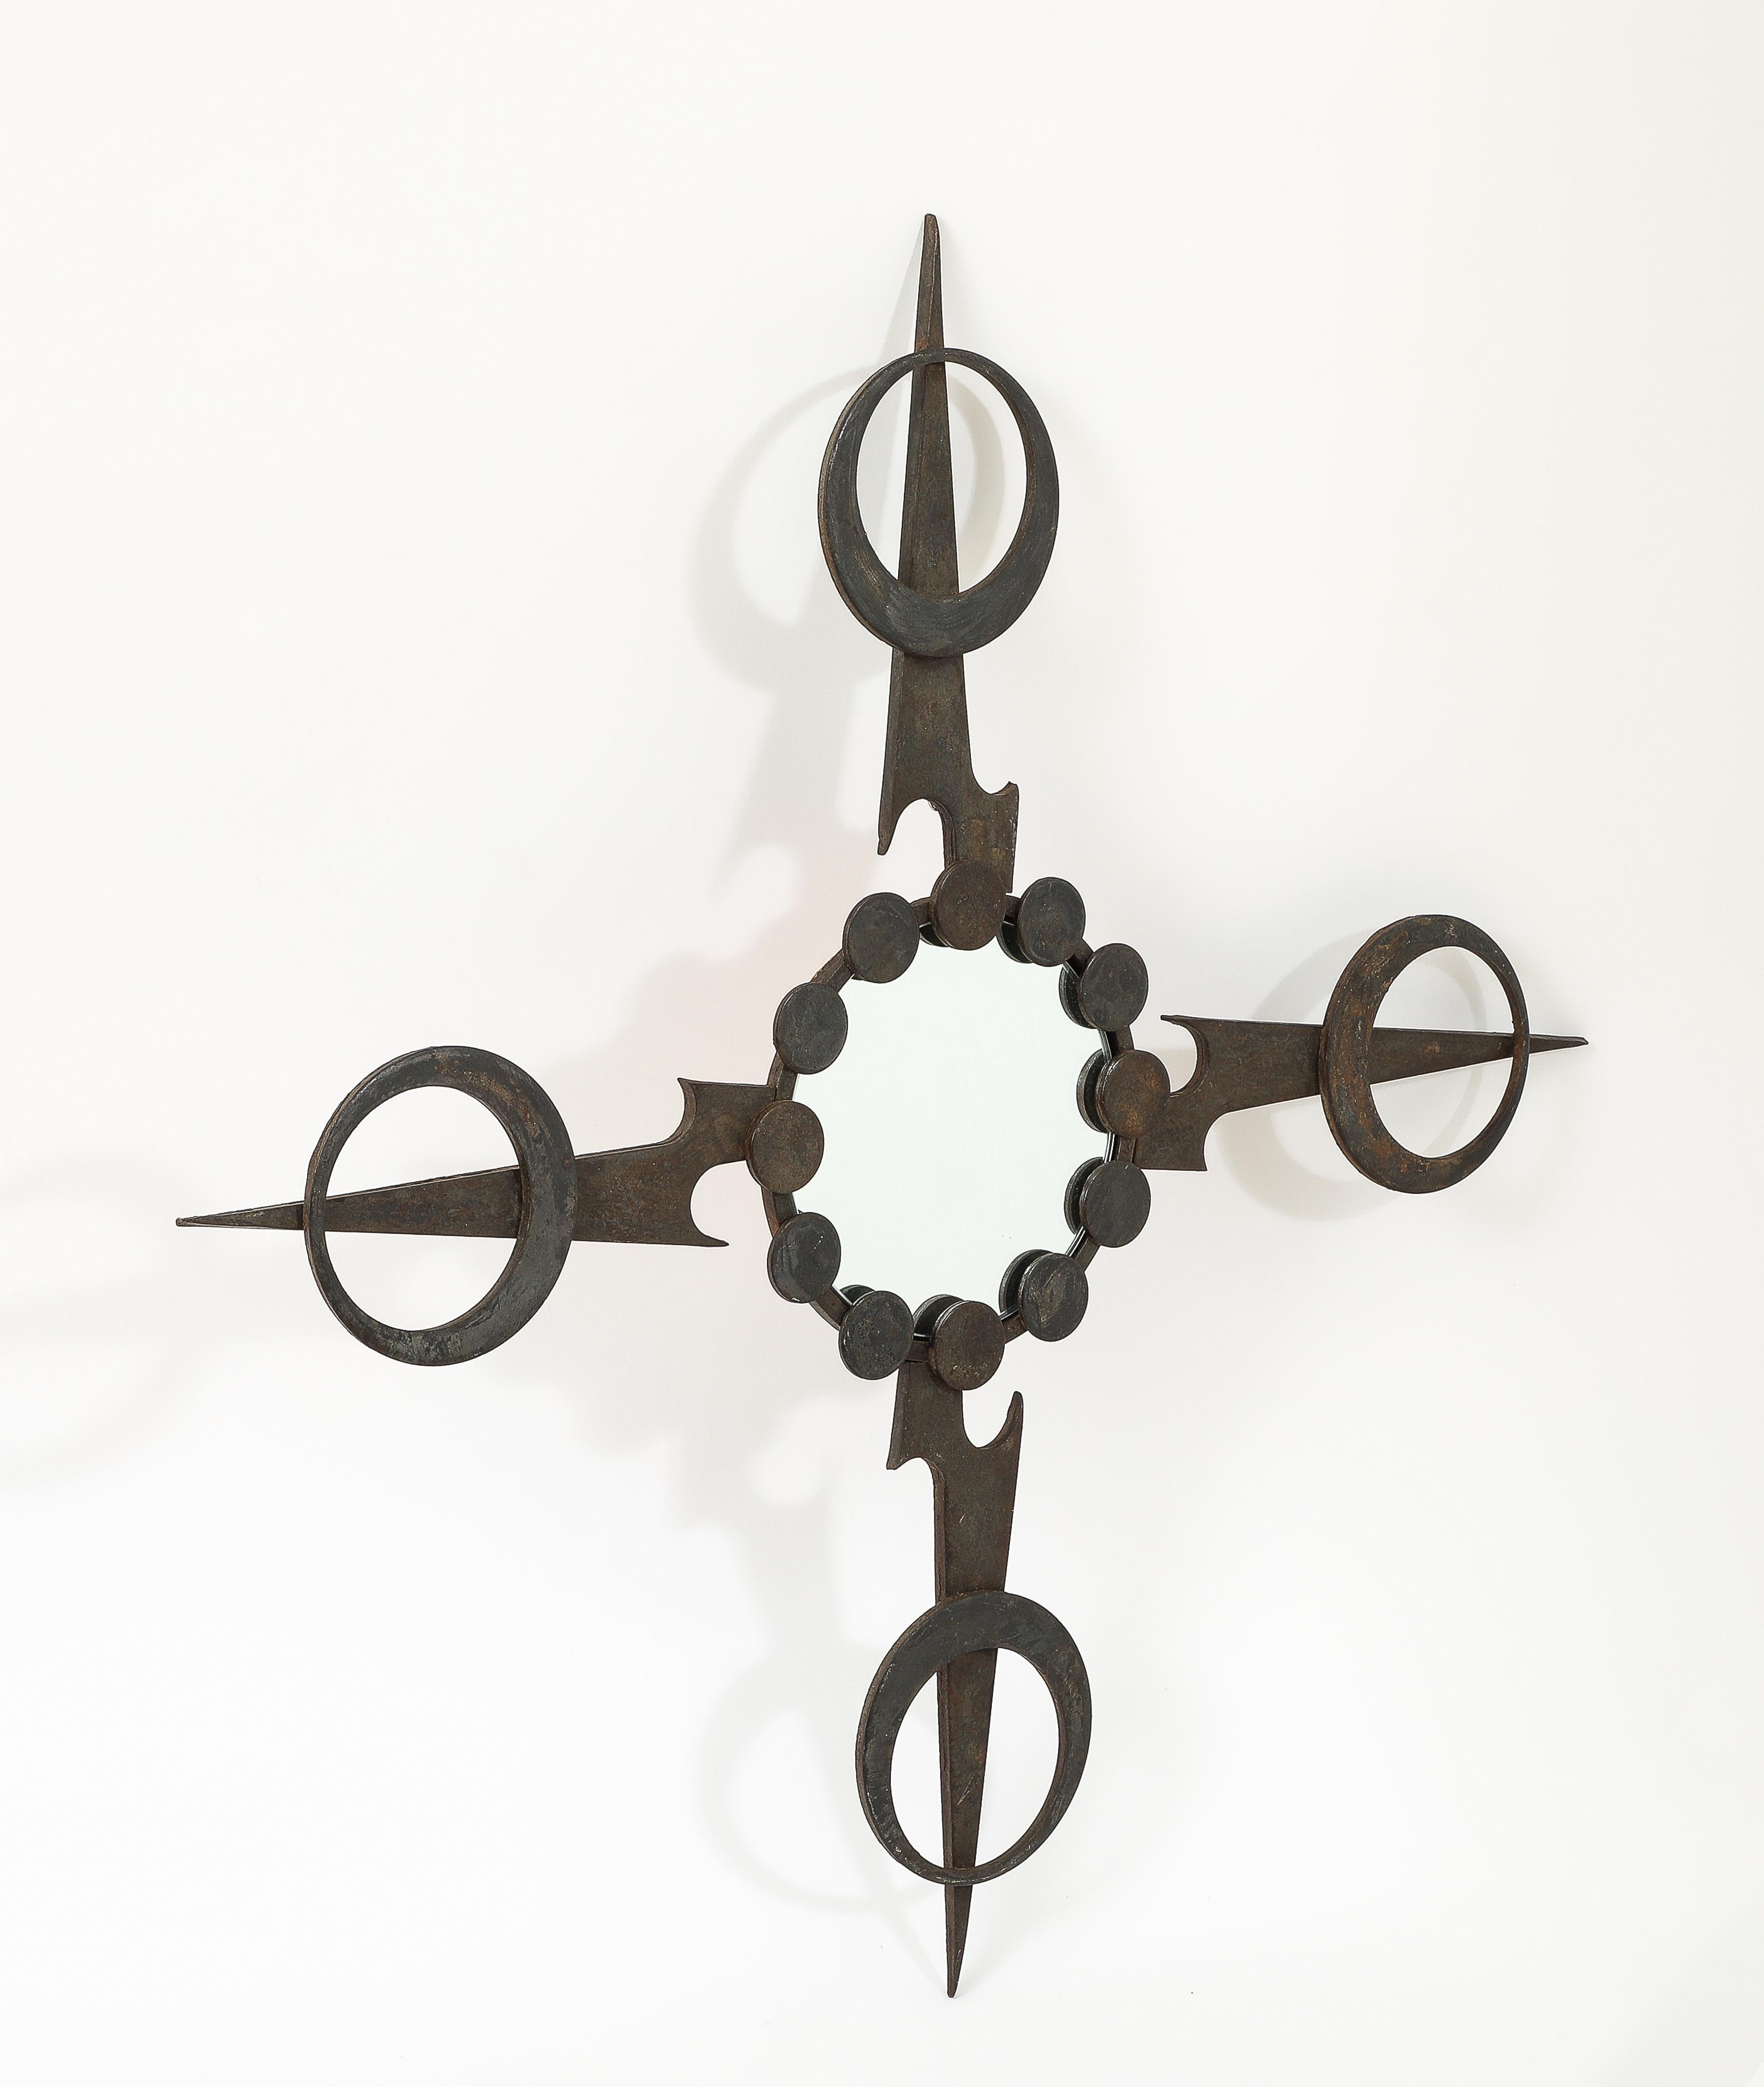 Graphic welded brutalist wrought iron mirror in the shape of a star. France, 1970's.
Patina on all surfaces.